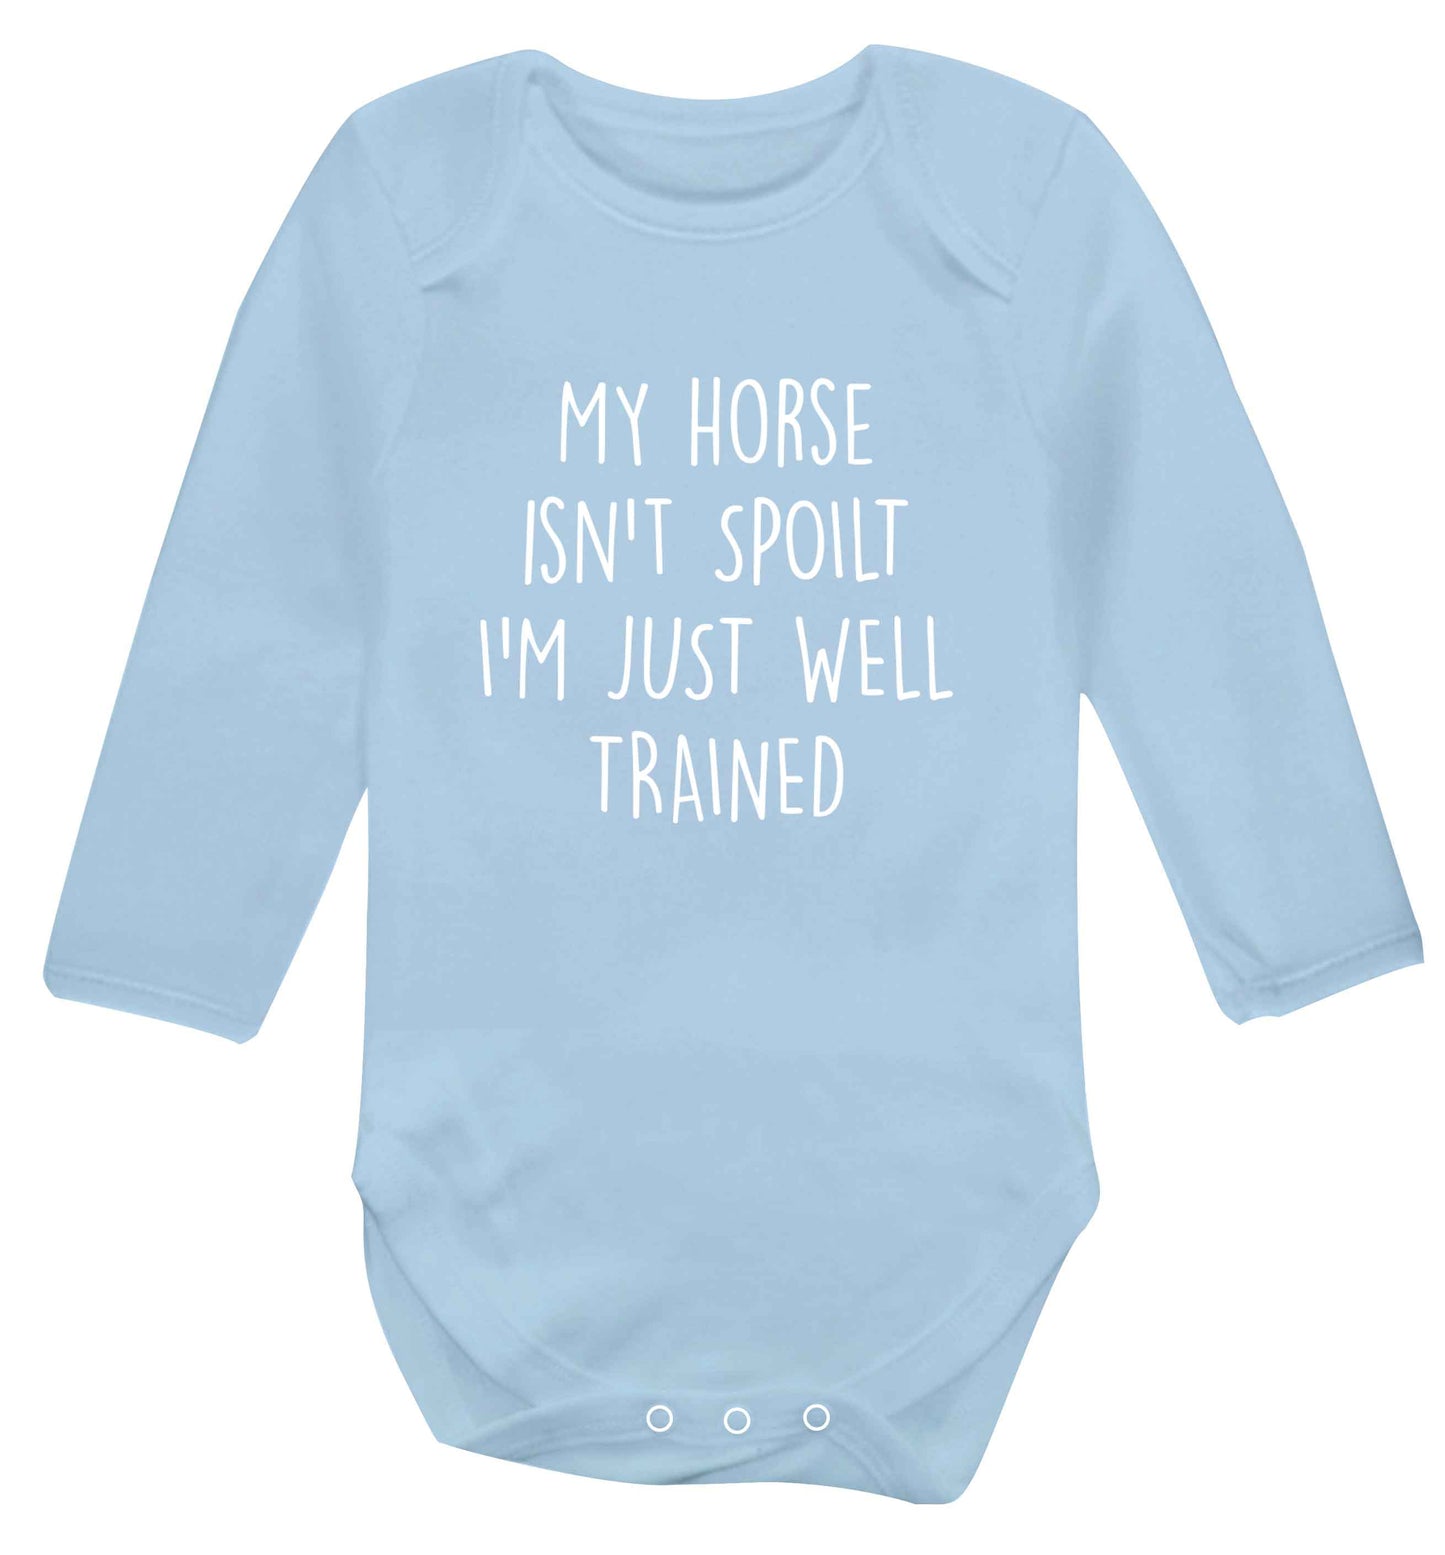 My horse isn't spoilt I'm just well trained baby vest long sleeved pale blue 6-12 months